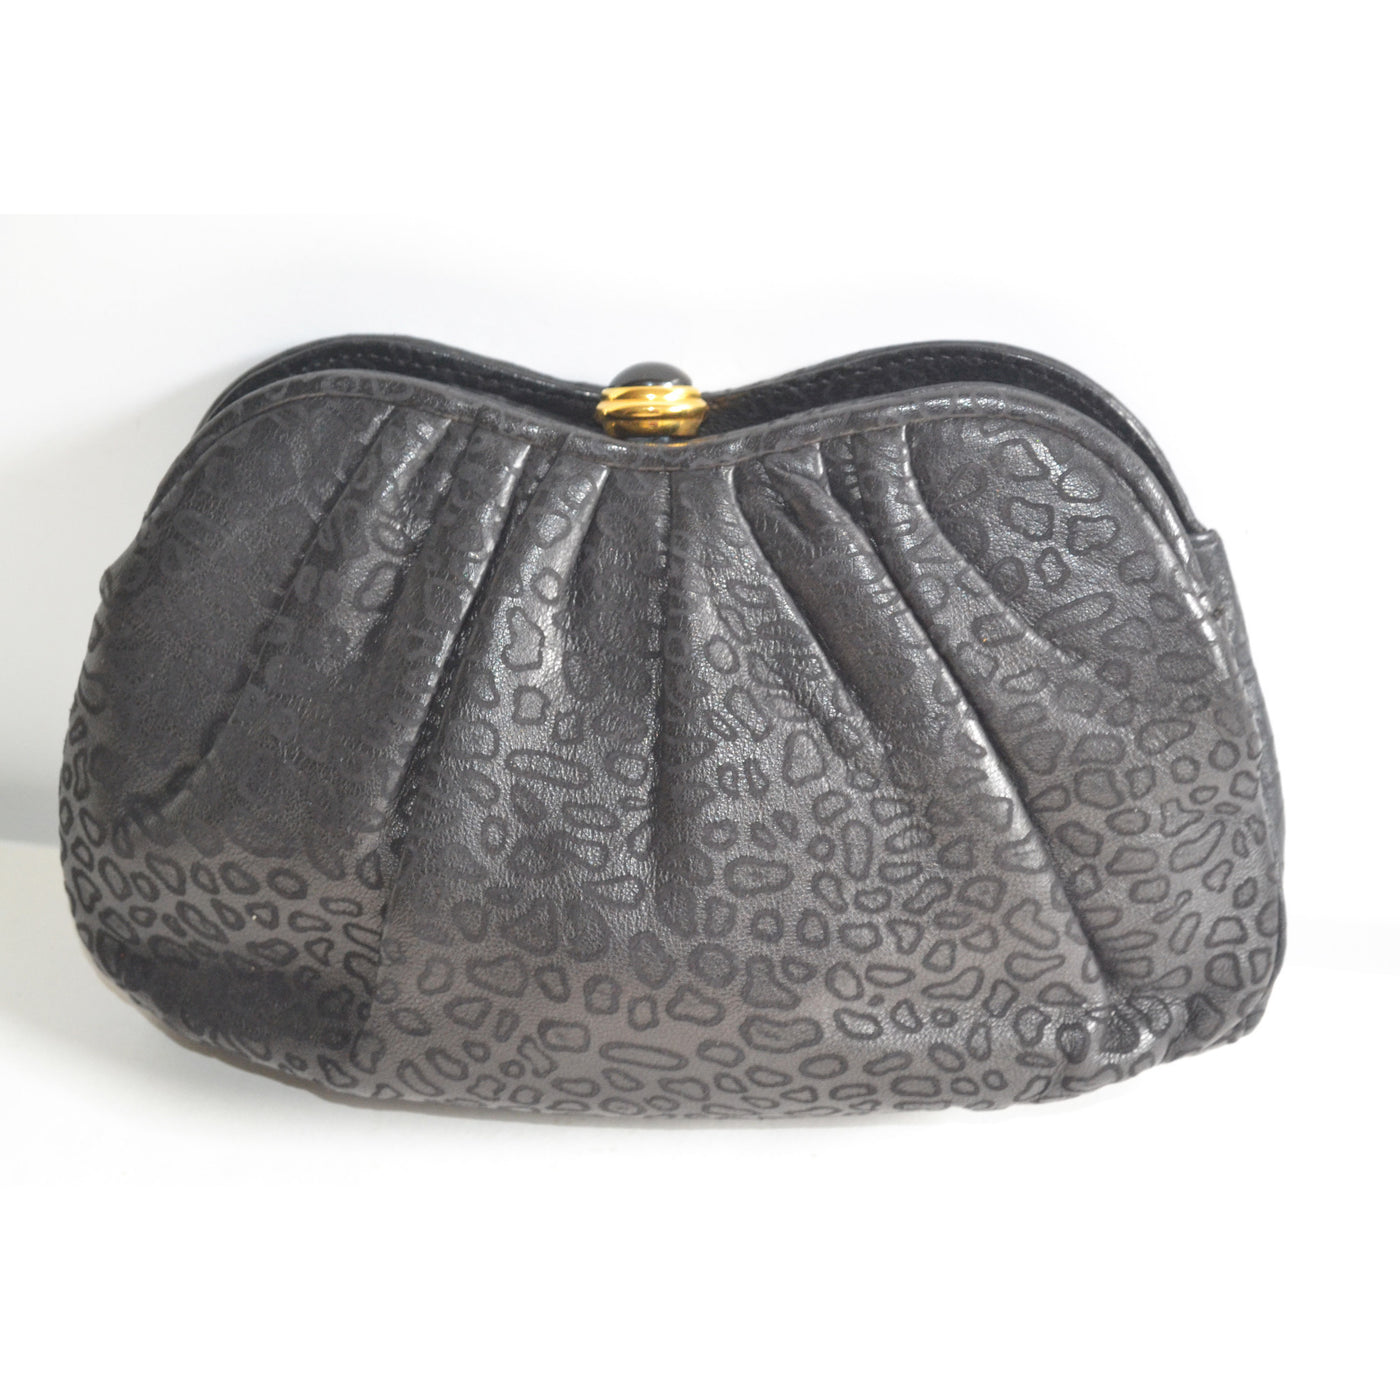 Vintage Embossed Black Leather Clutch Purse By Tiras 